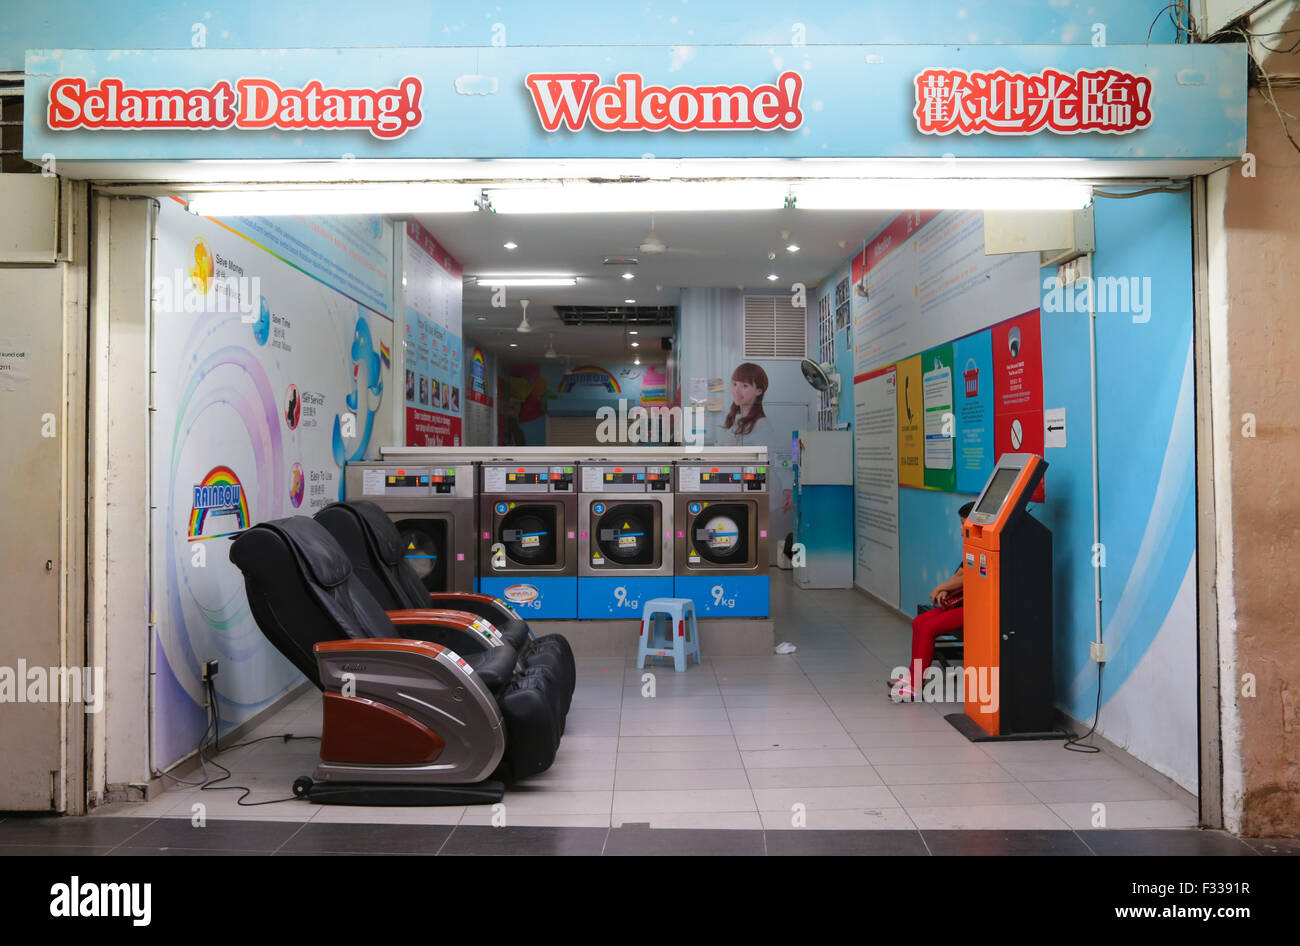 How to Start a Self Service Laundry